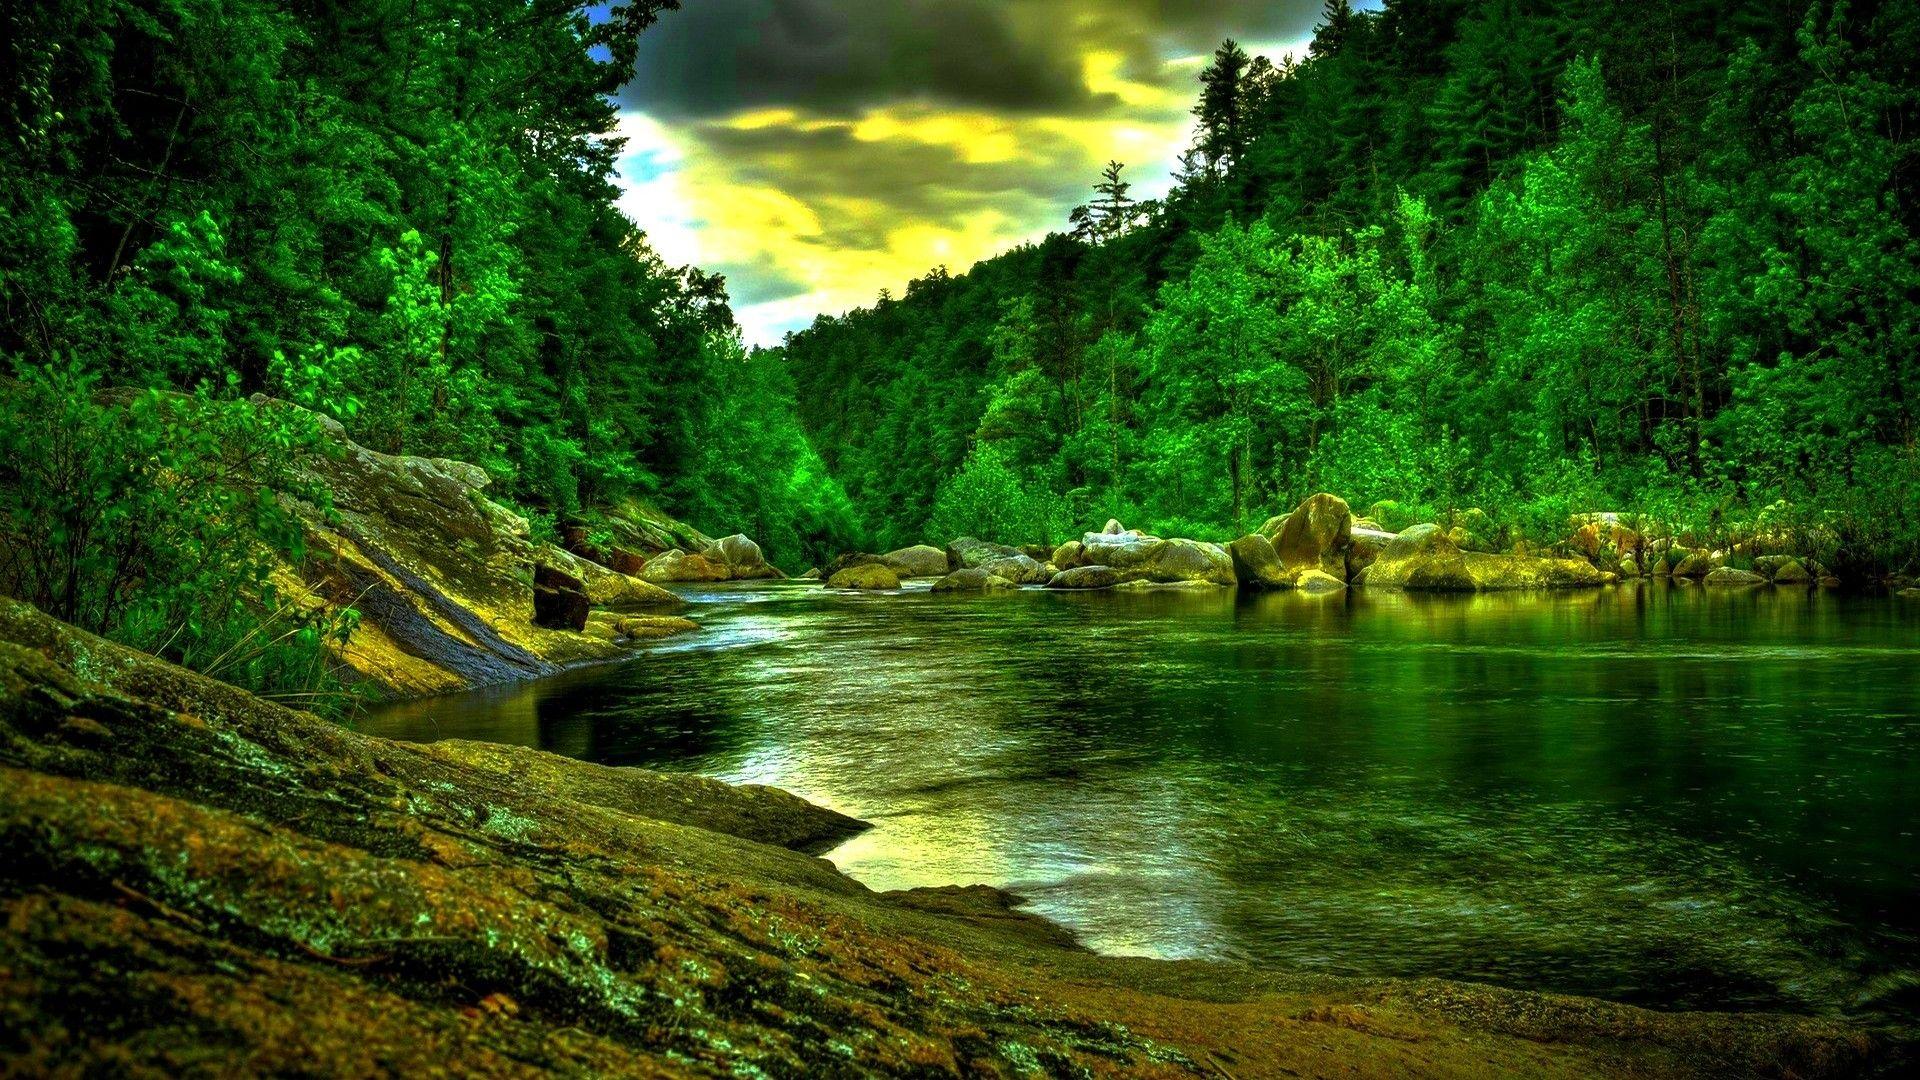 River's Edge: Download Beautiful Green Forest River Wide HD